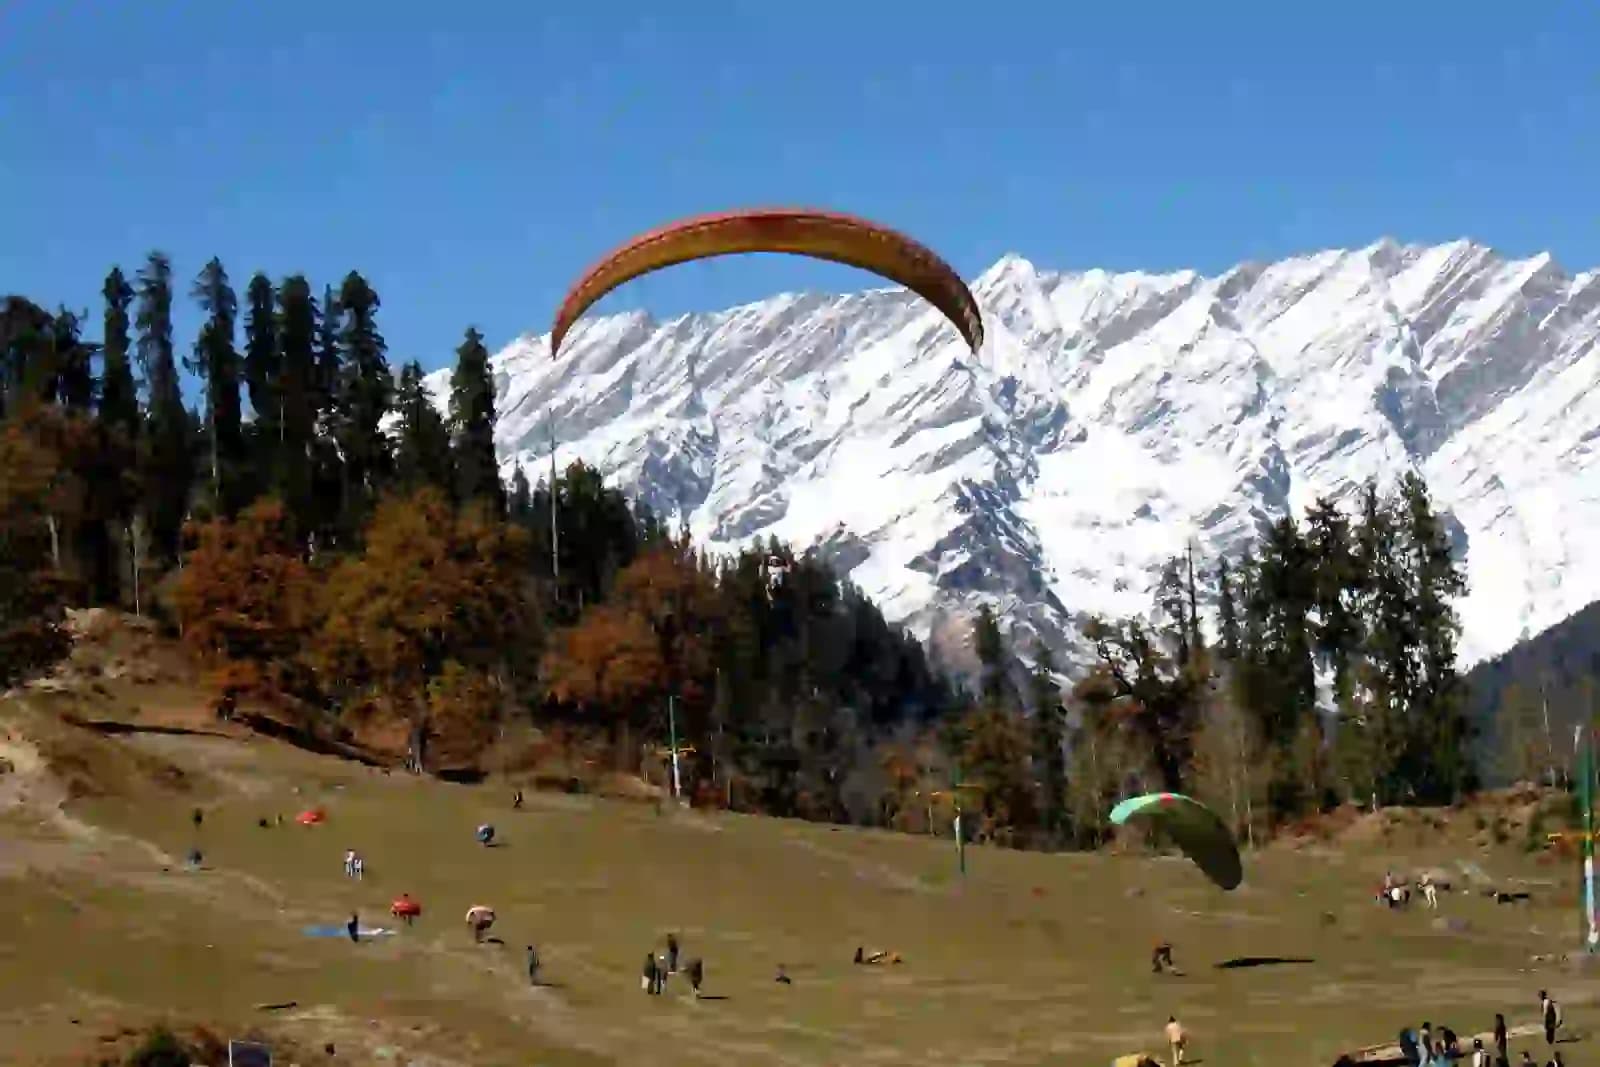 Solang valley activity himachal tour package